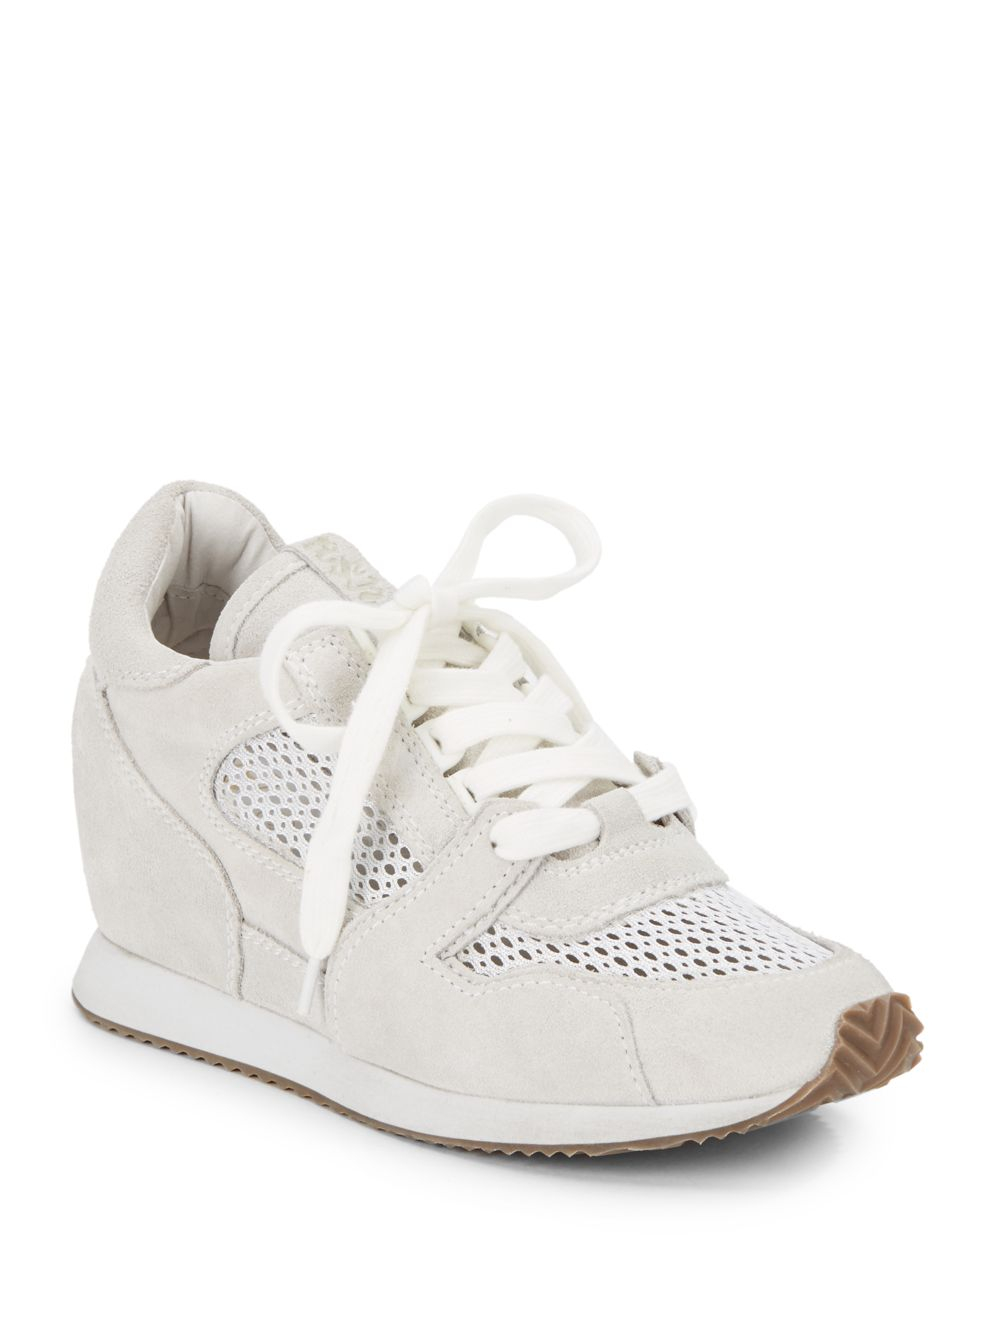 Wedge fashion sneakers for women